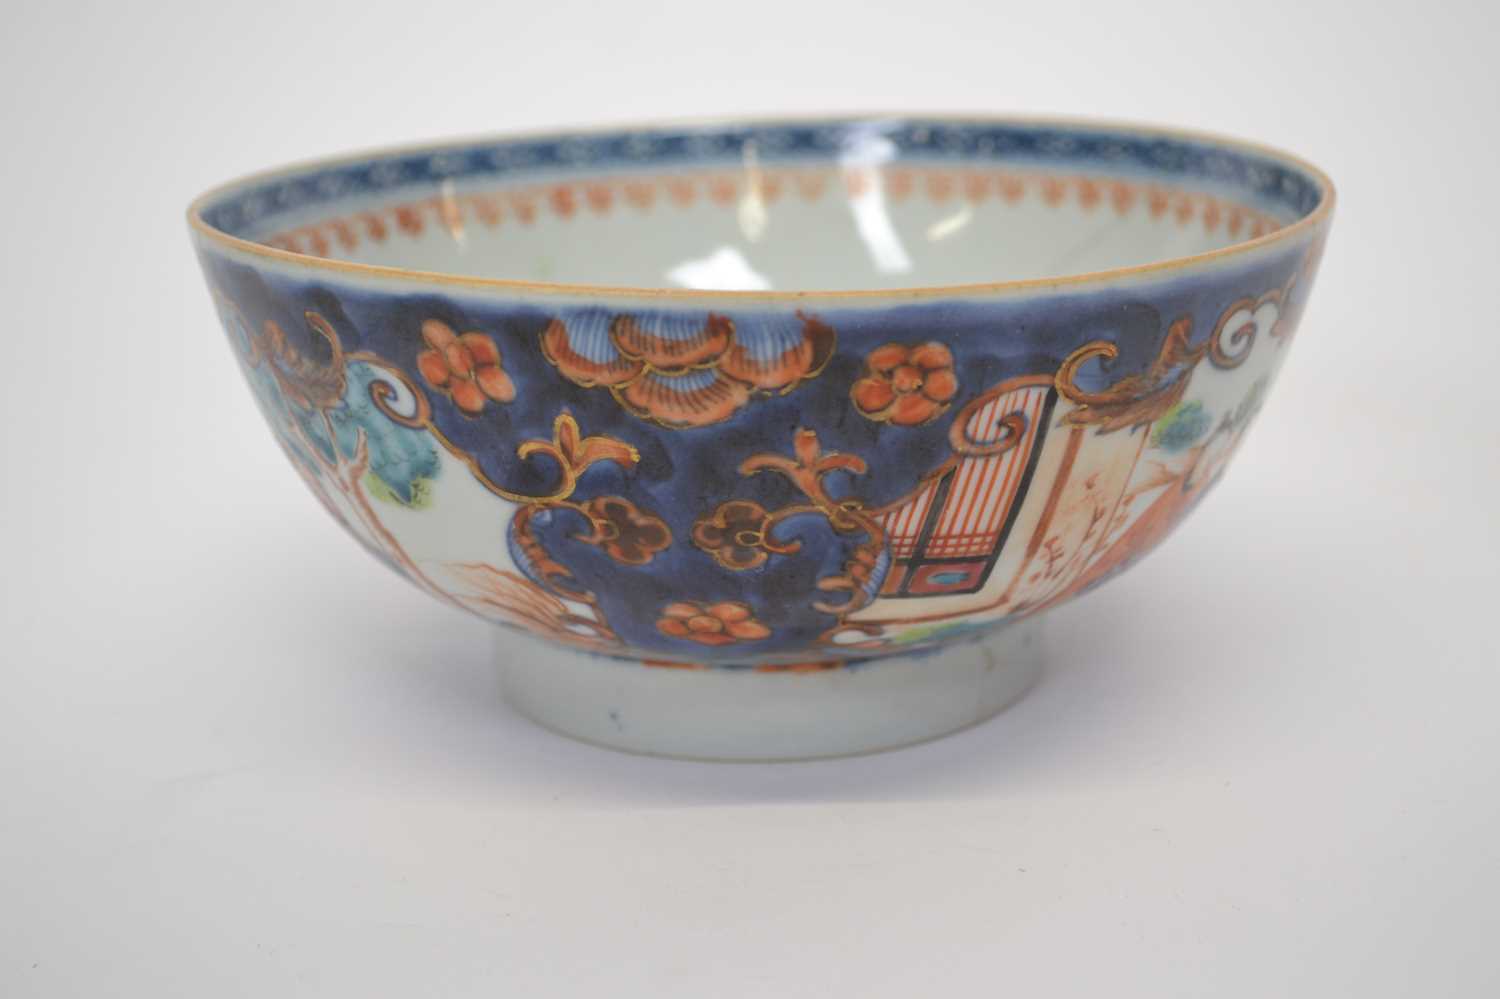 Mid 18th Century Chinese porcelain bowl with polychrome designs (af)